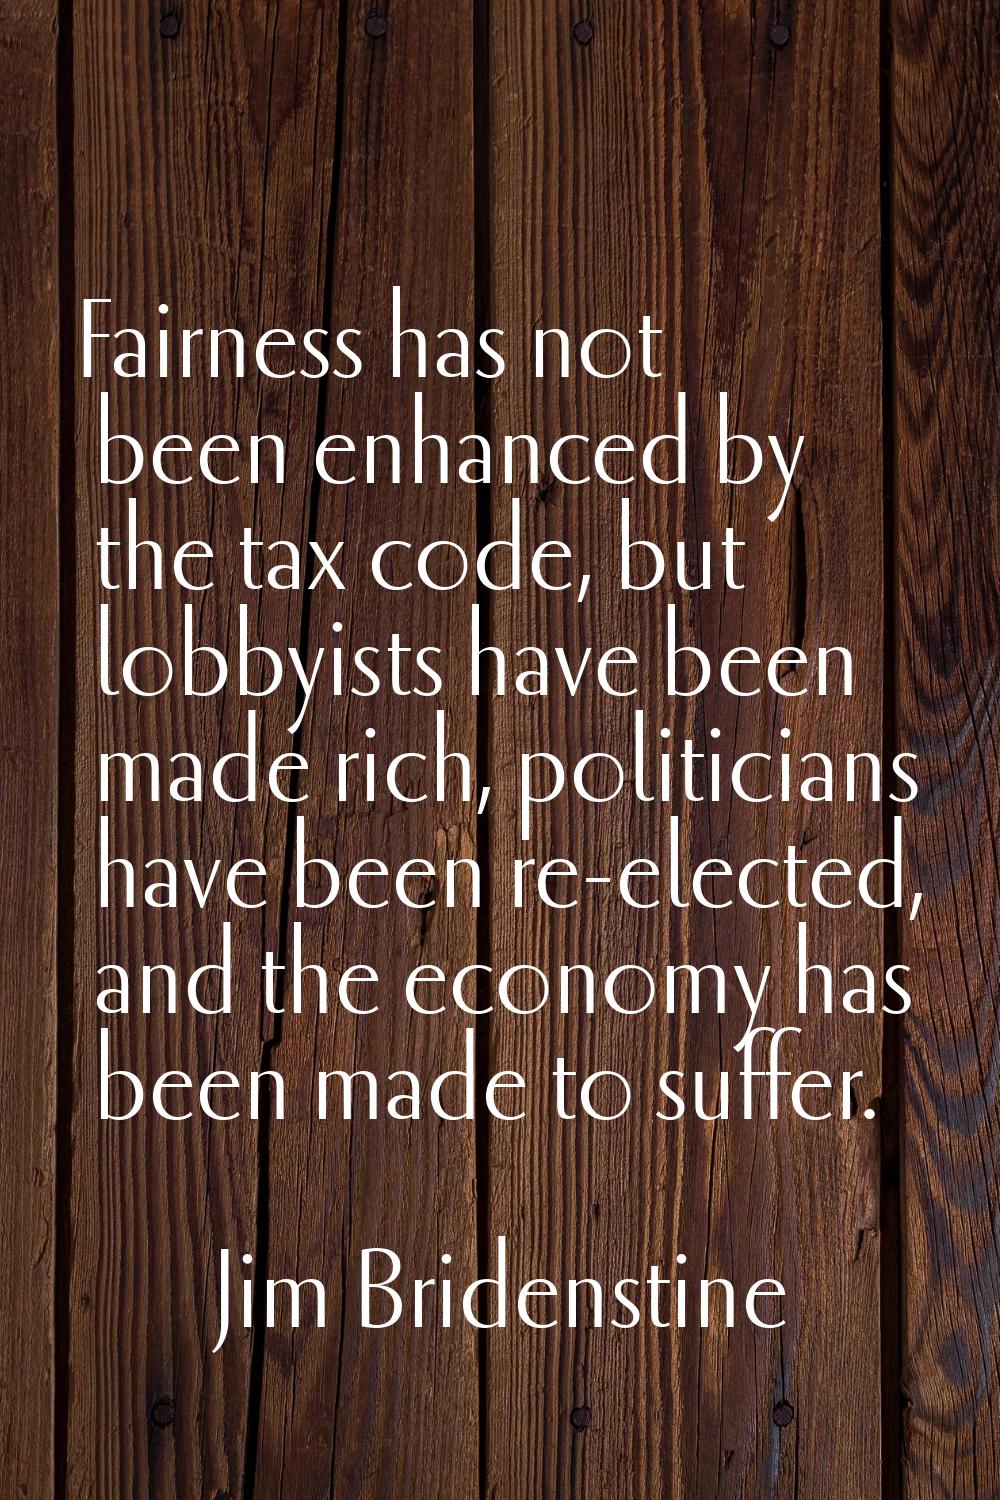 Fairness has not been enhanced by the tax code, but lobbyists have been made rich, politicians have